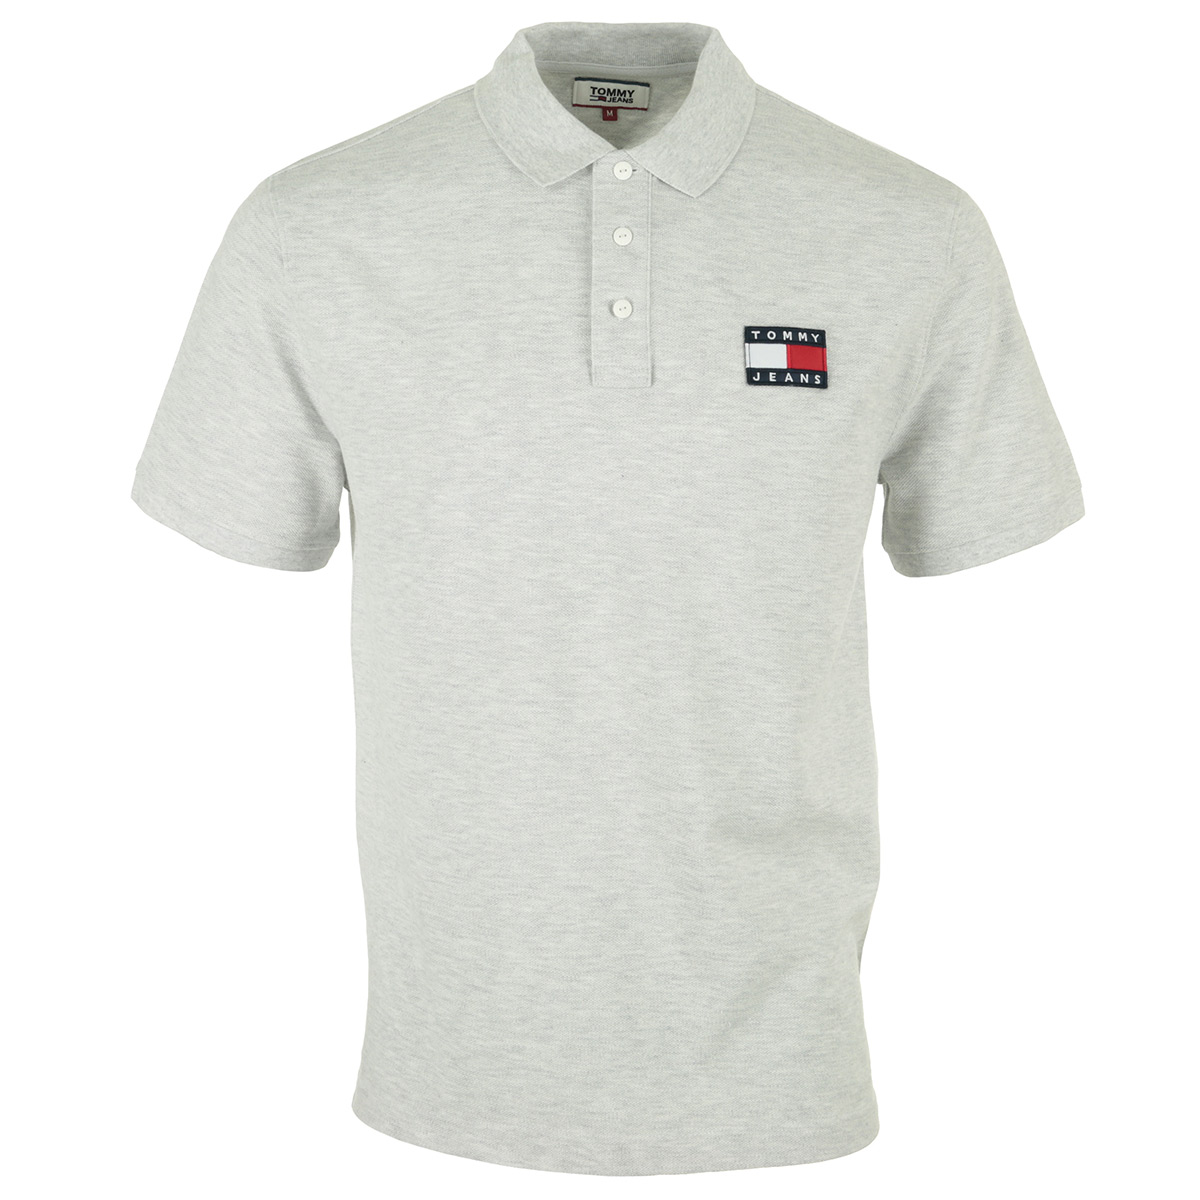 Tommy Hilfiger Badge Polo